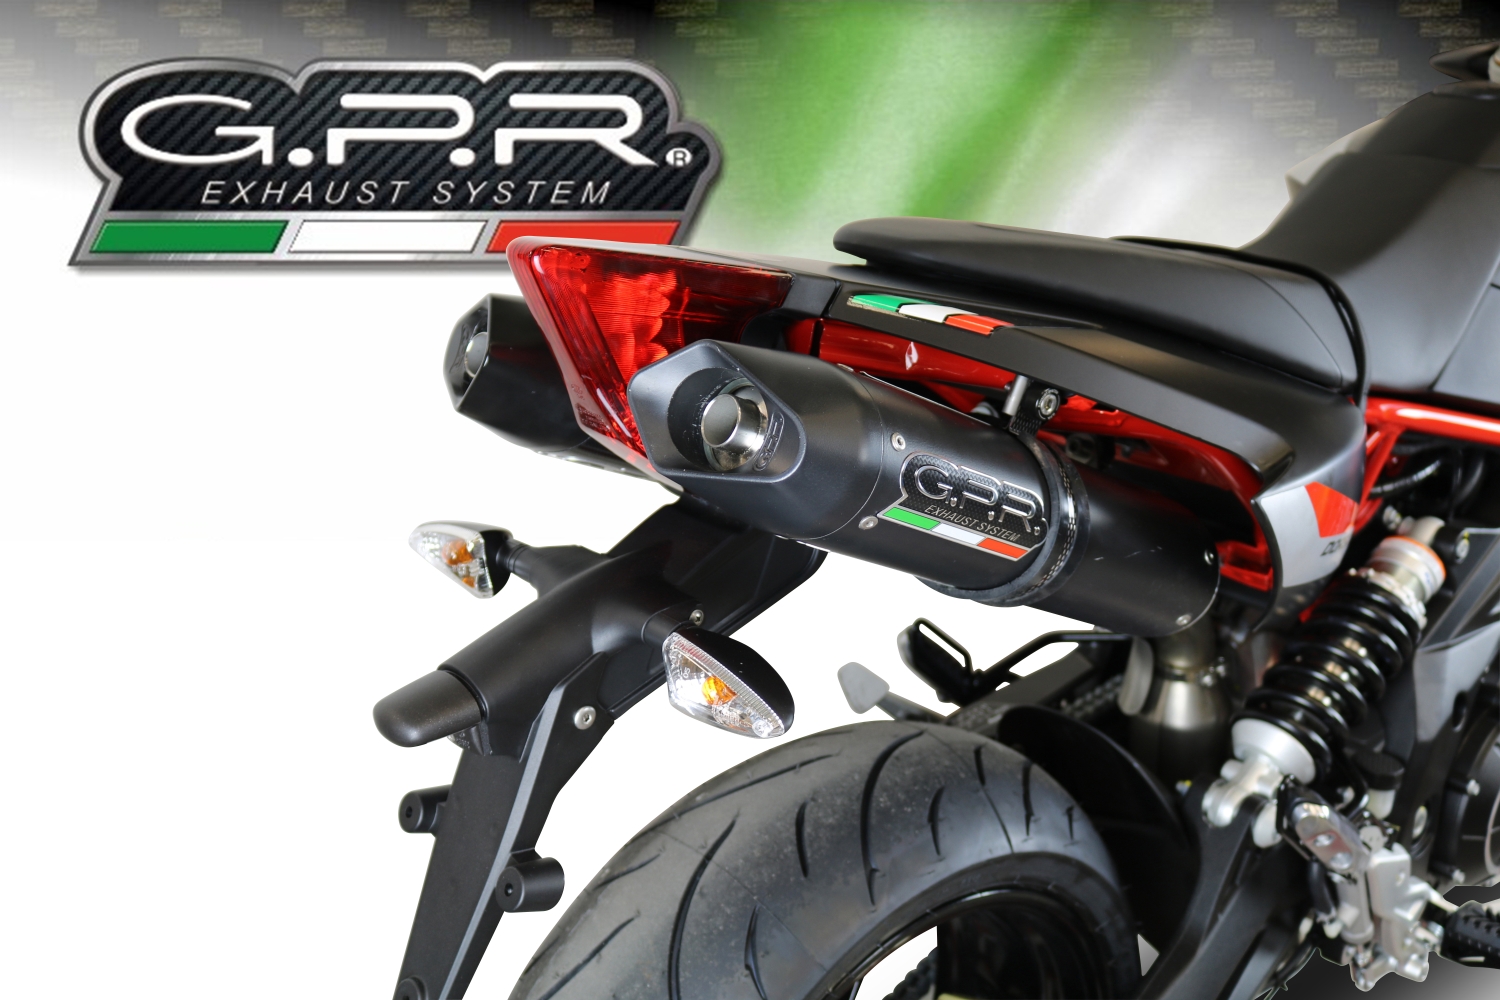 Exhaust system compatible with Aprilia Dorsoduro 900 2017-2020, Furore Evo4 Nero, Dual Homologated legal slip-on exhaust including removable db killers and link pipes 